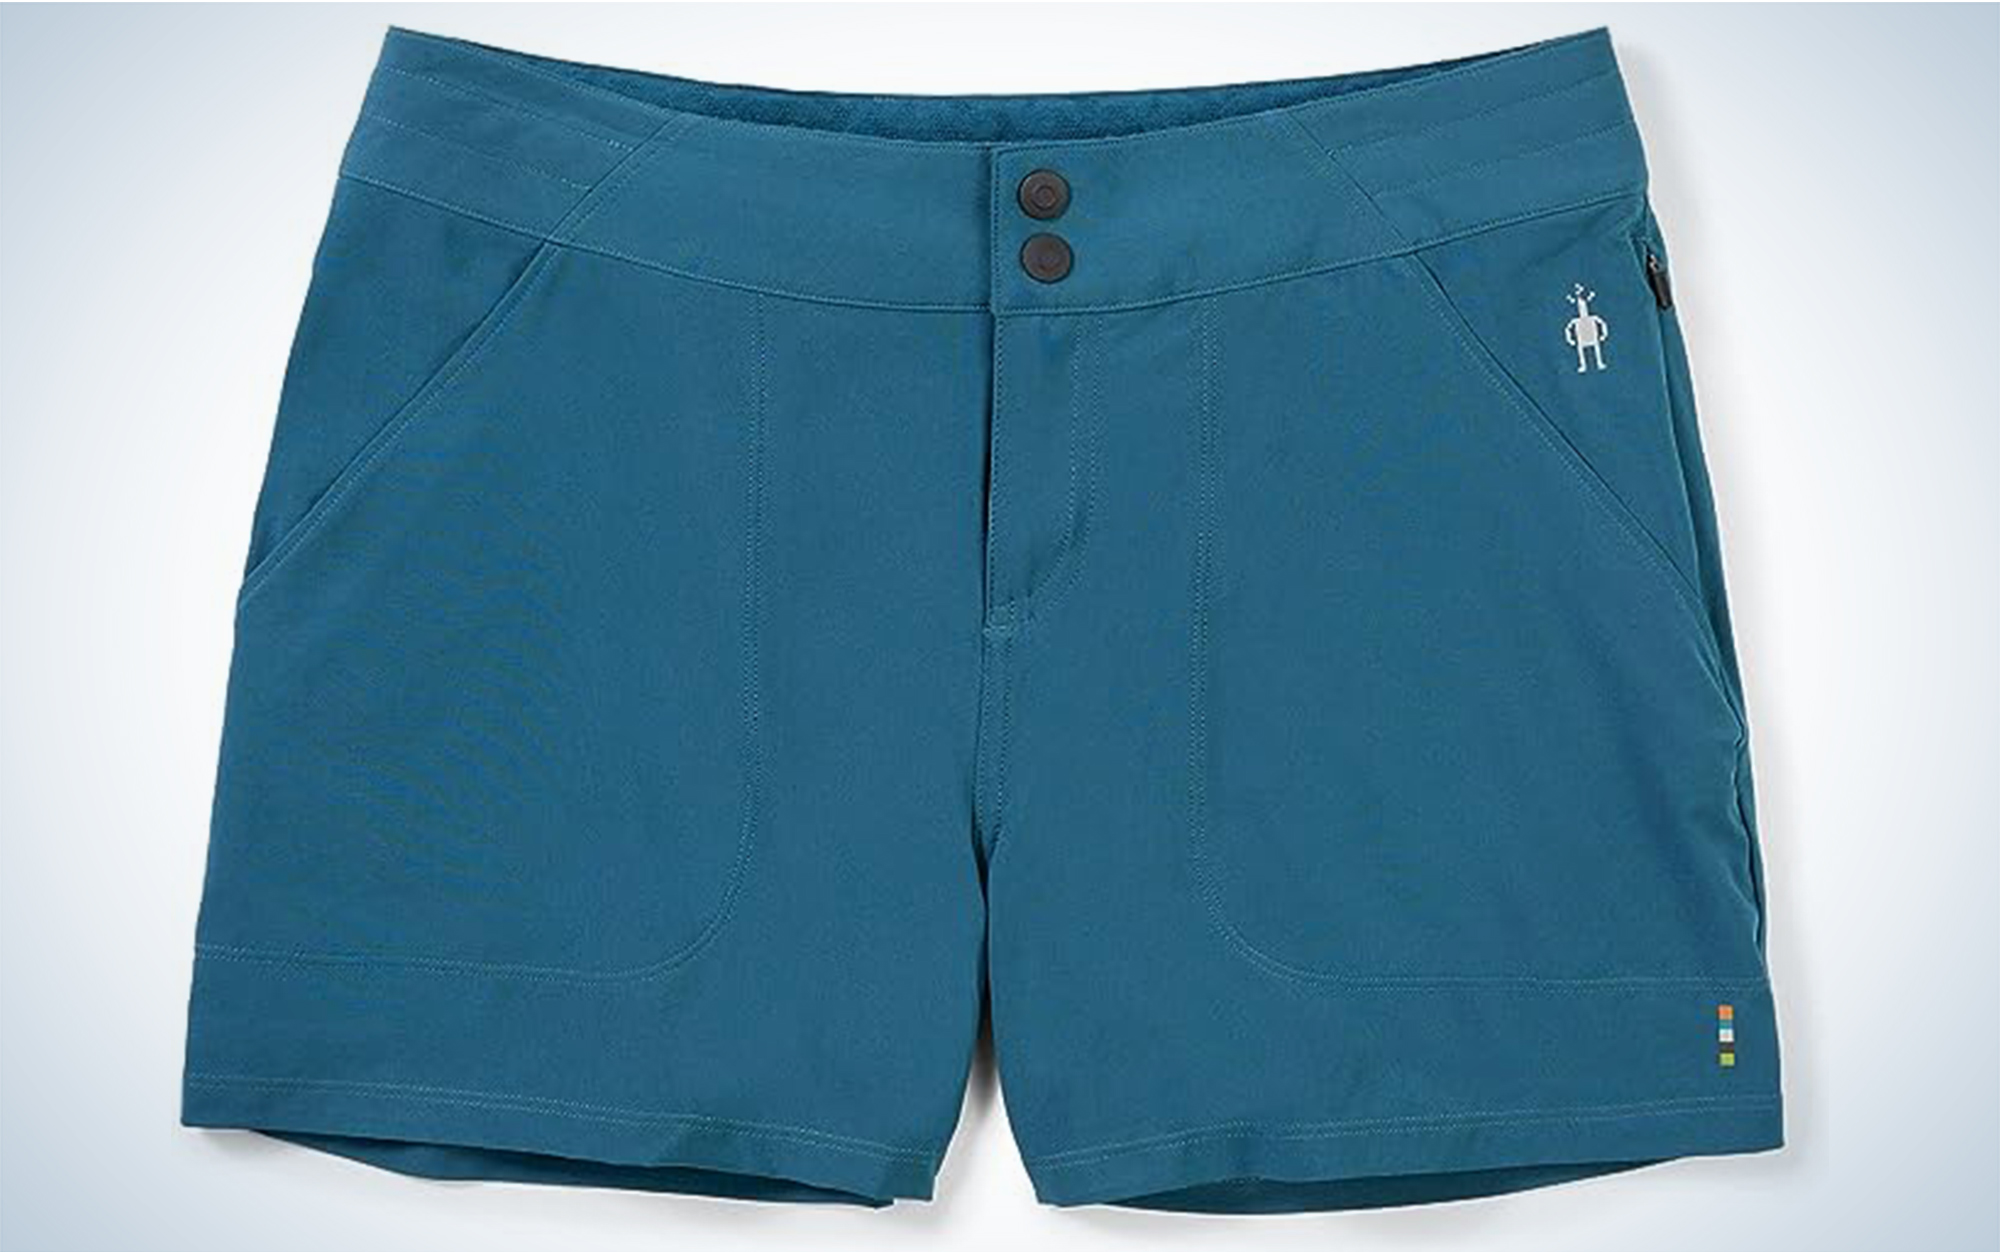 We tested the Smartwool Womenâs Hike Short.